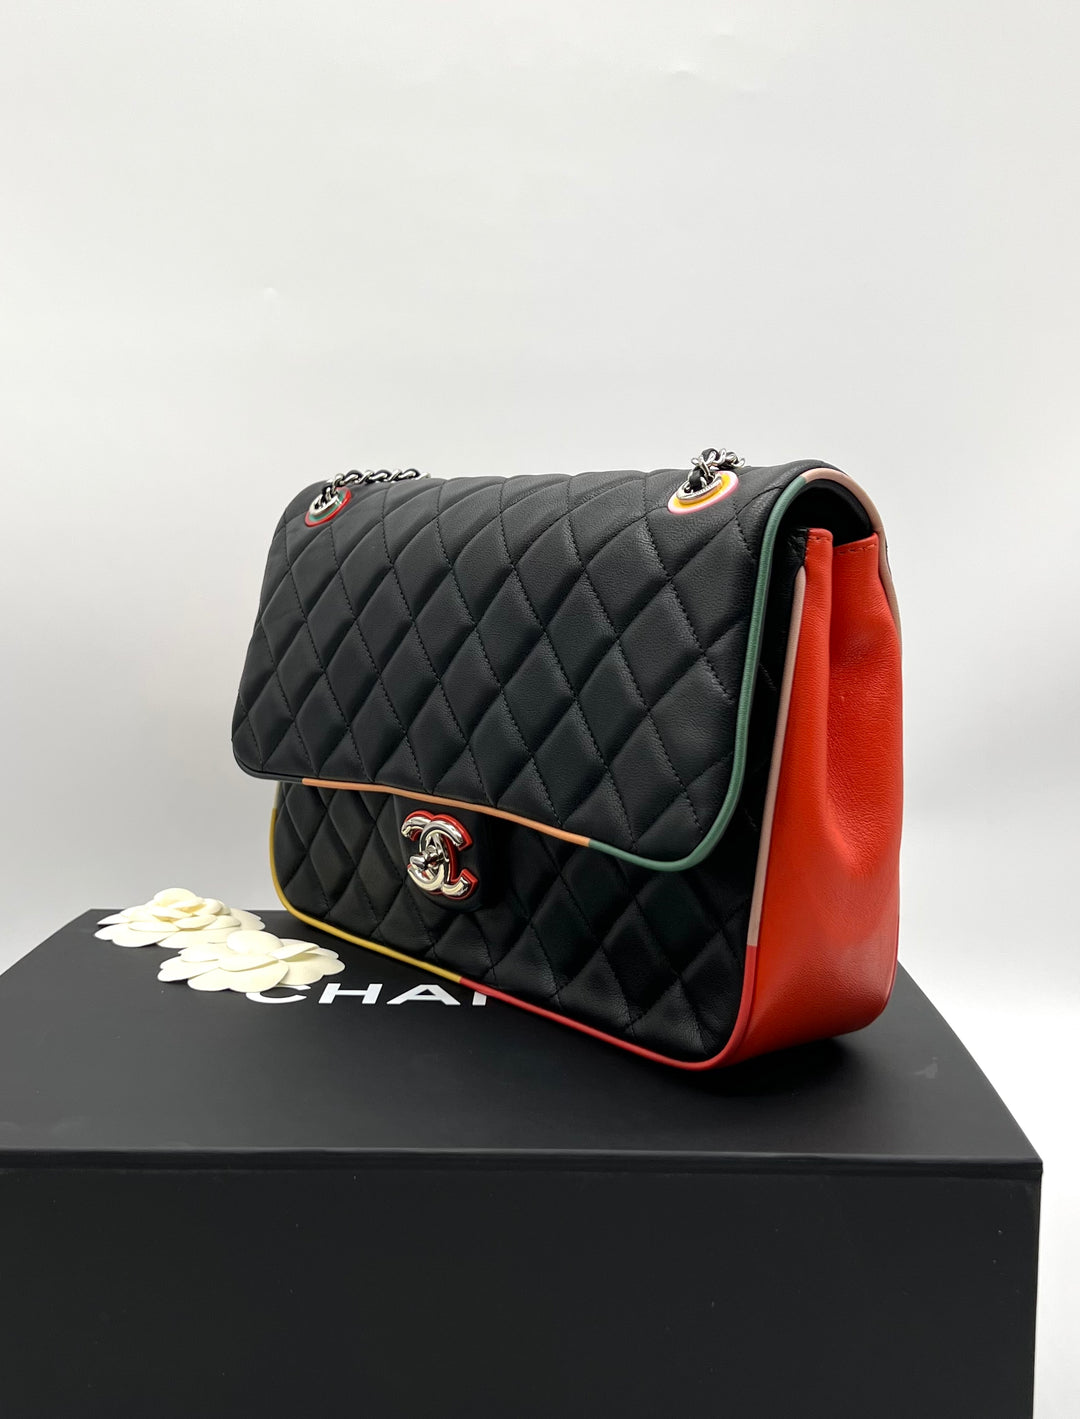 CHANEL Quilted Lambskin Jumbo Cuba Multi-Color Flap Bag